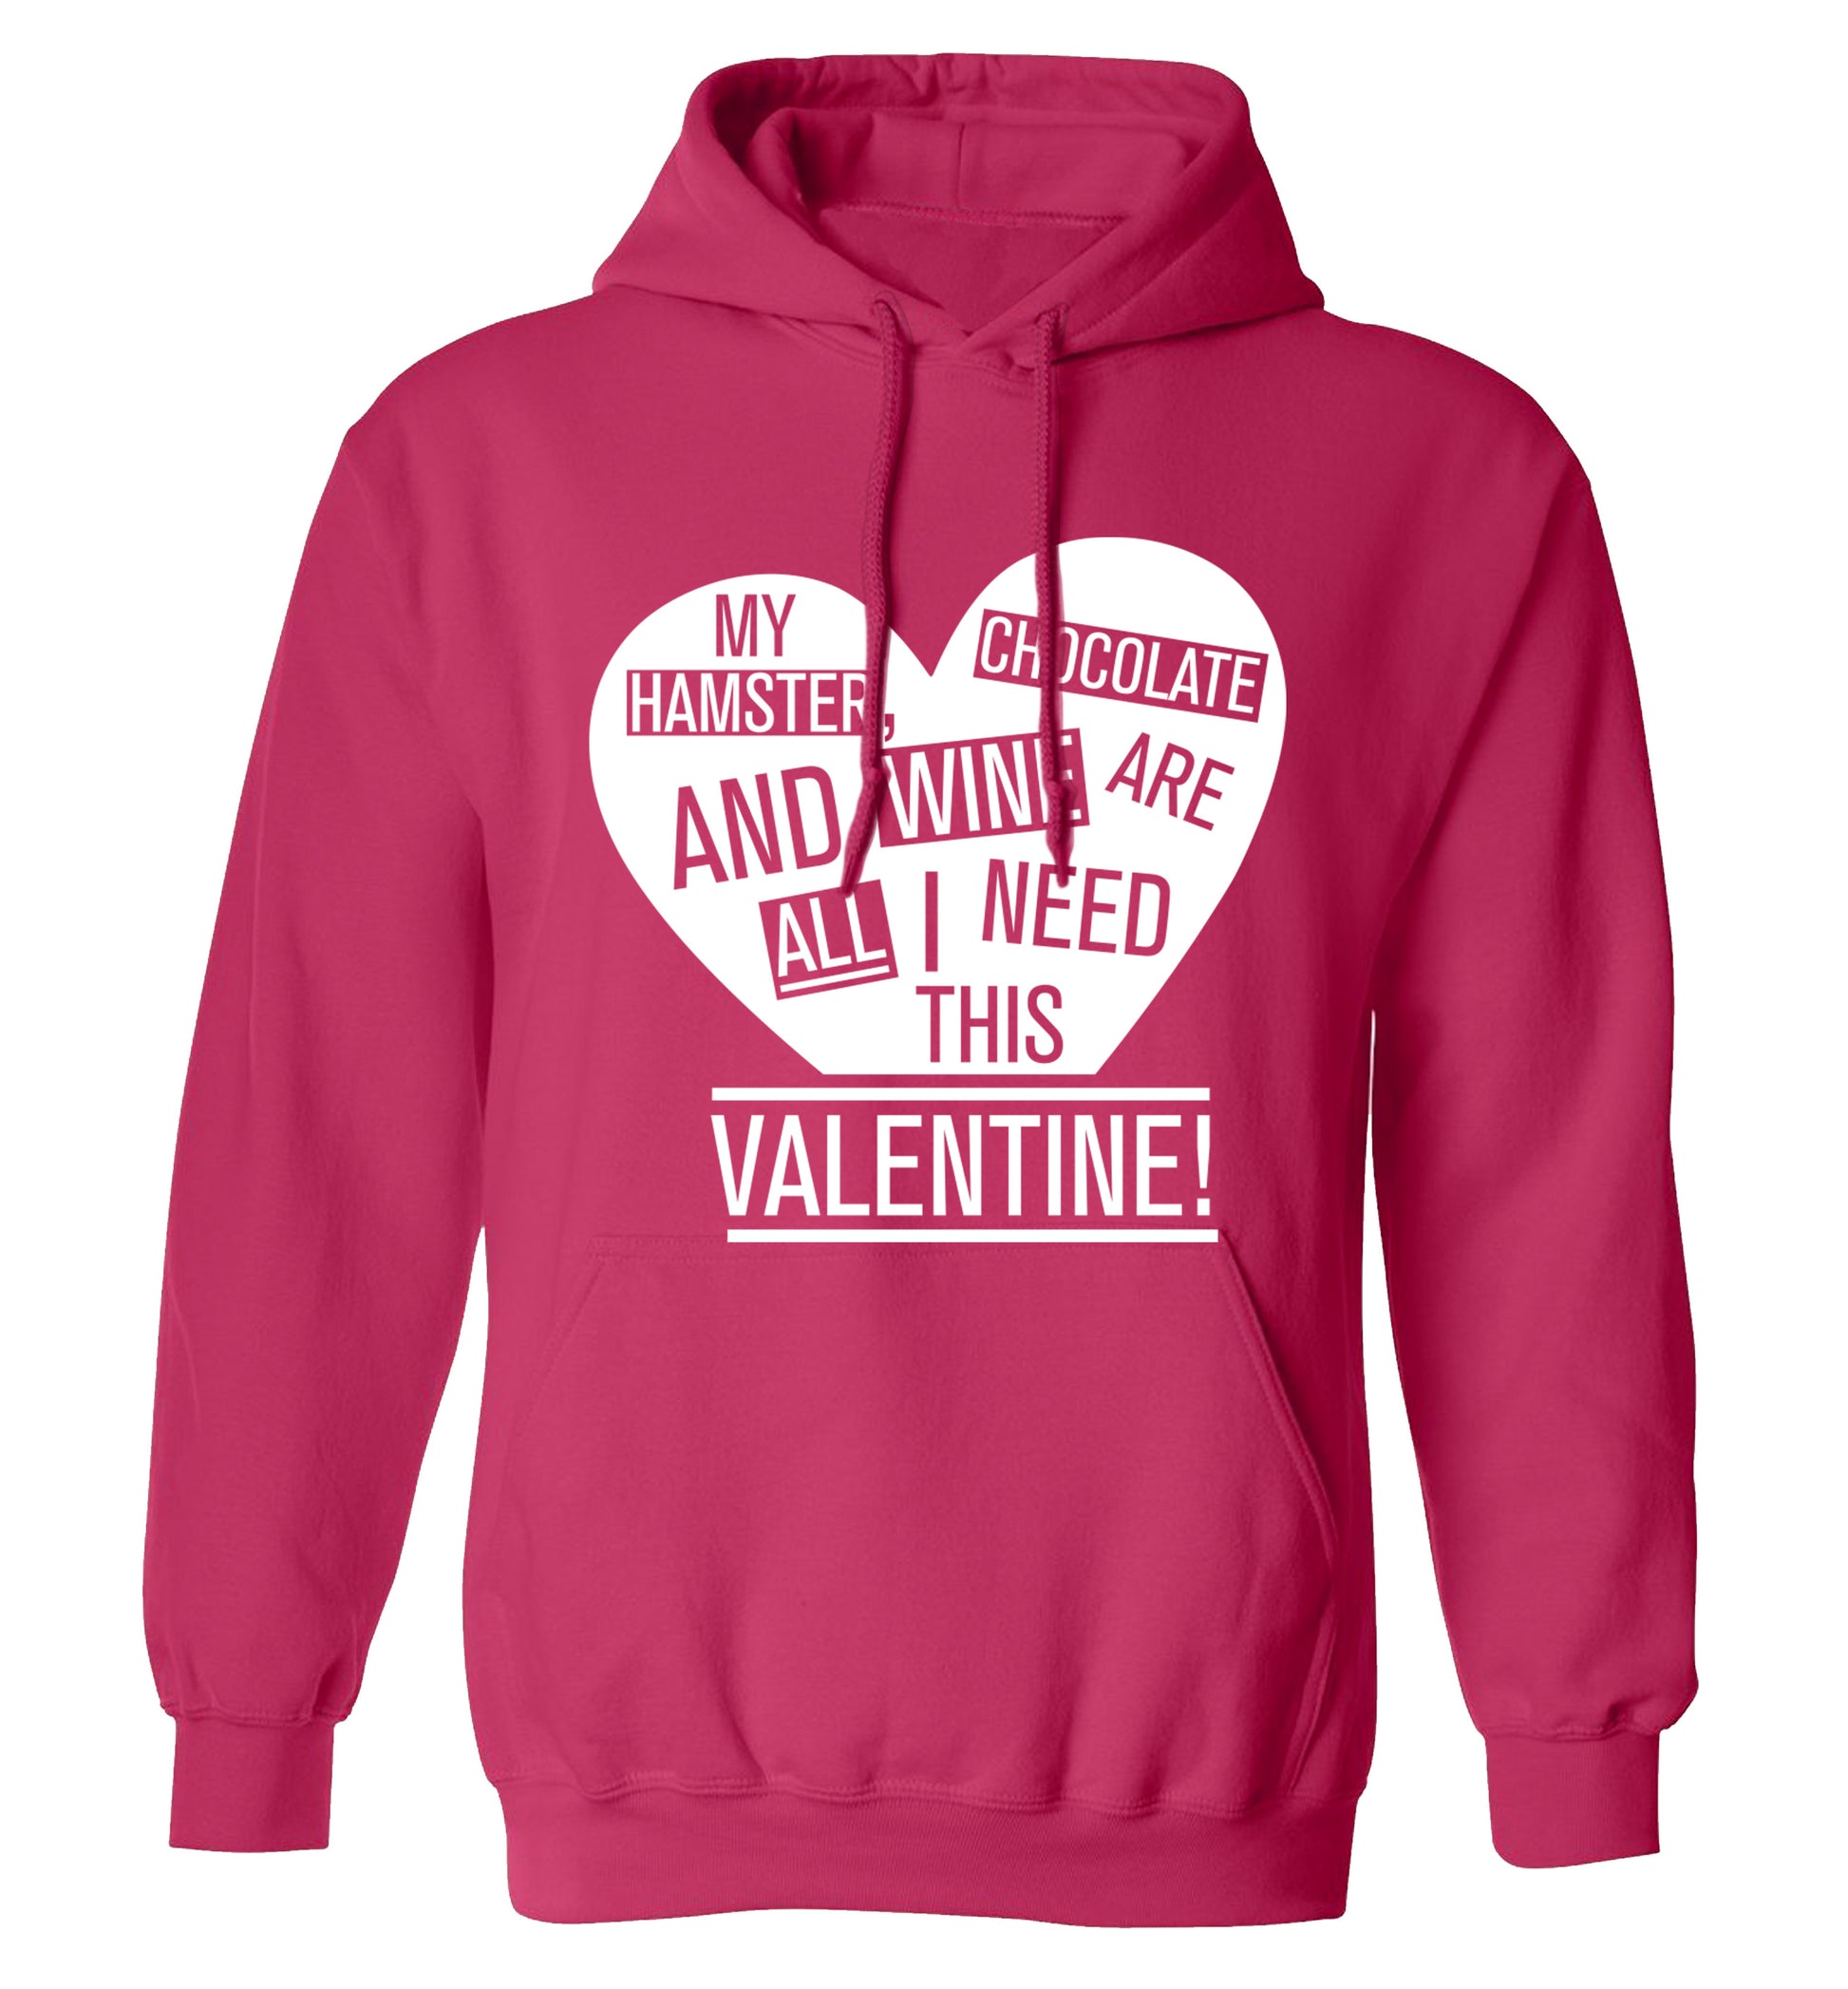 My hamster, chocolate and wine are all I need this valentine! adults unisex pink hoodie 2XL